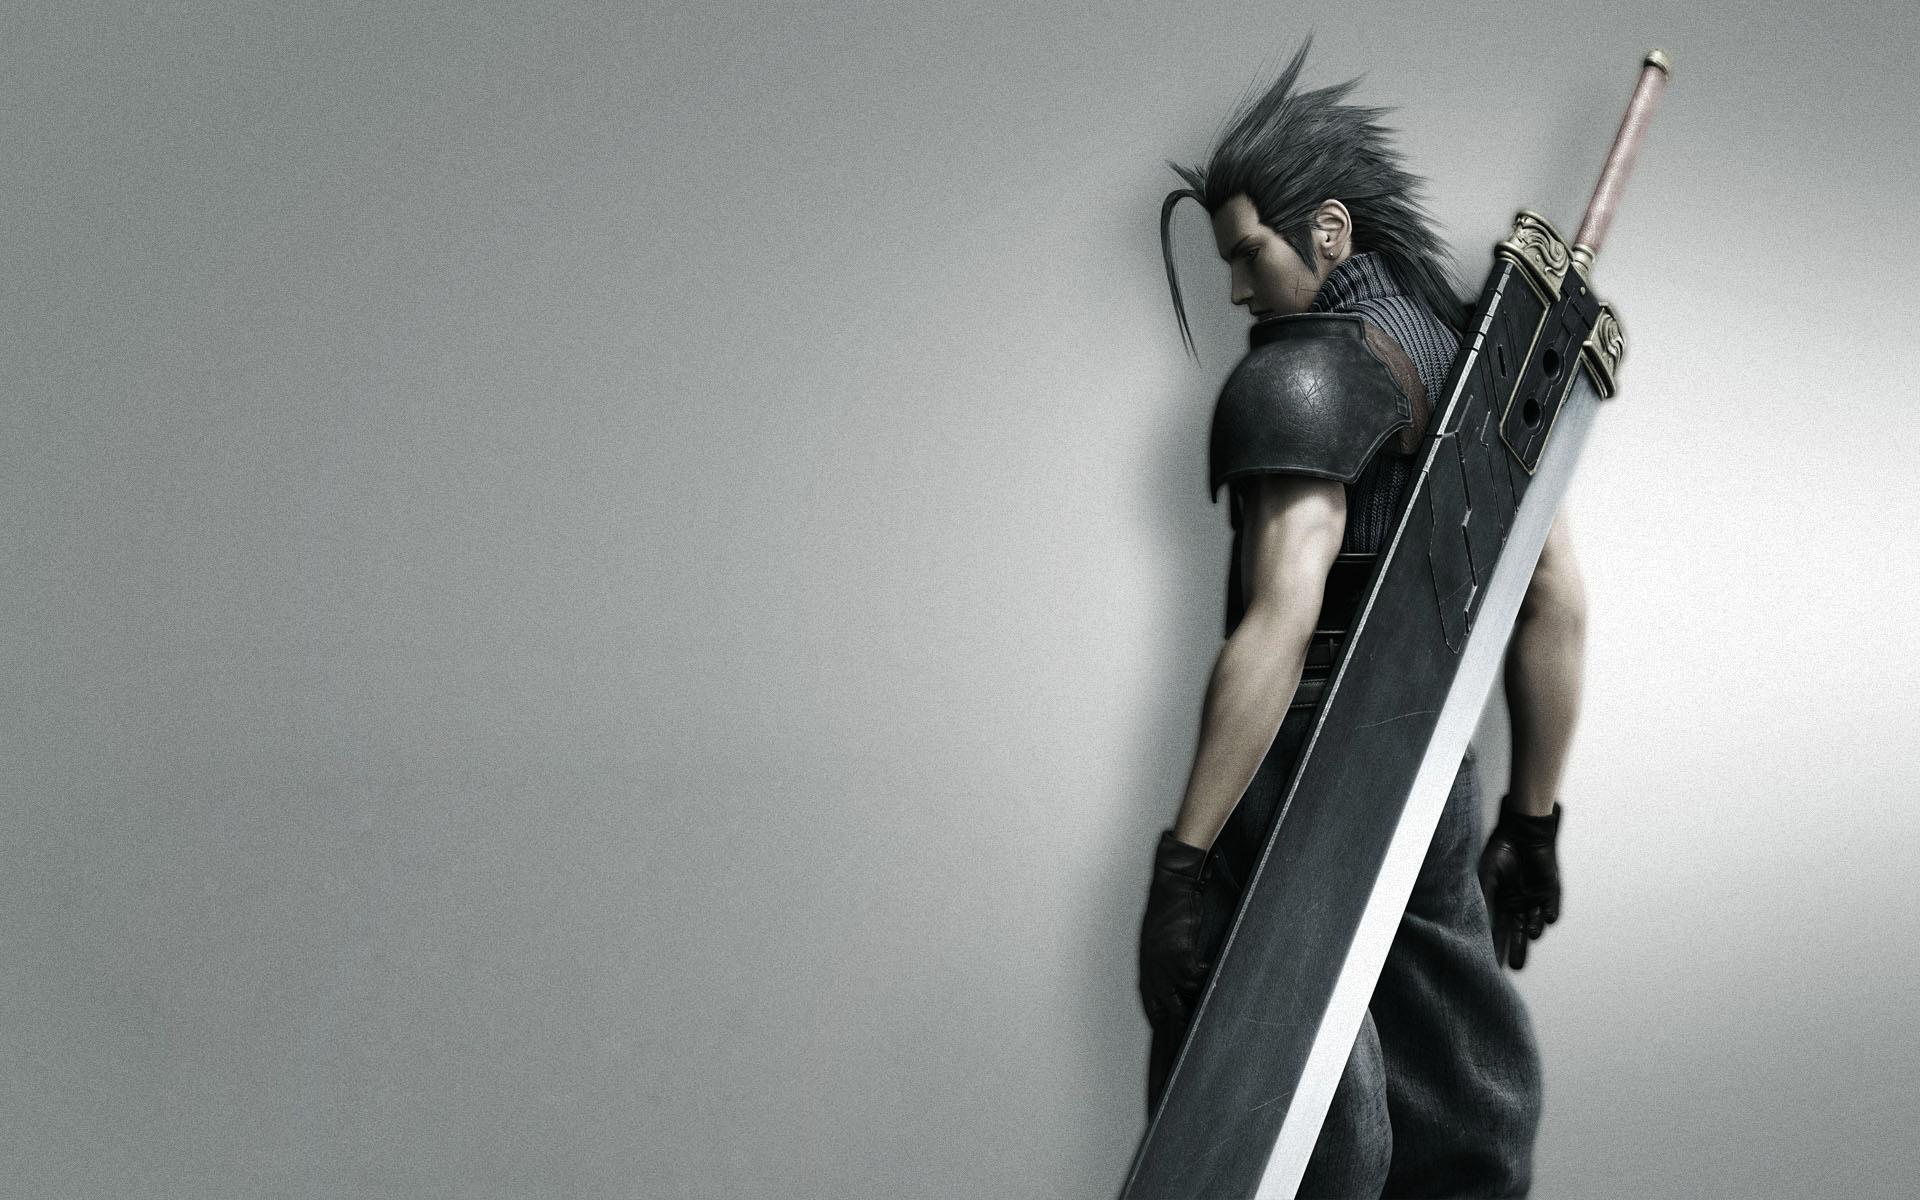 Zack Fair, a character from Final Fantasy VII, stands against a dramatic backdrop in this HD desktop wallpaper.